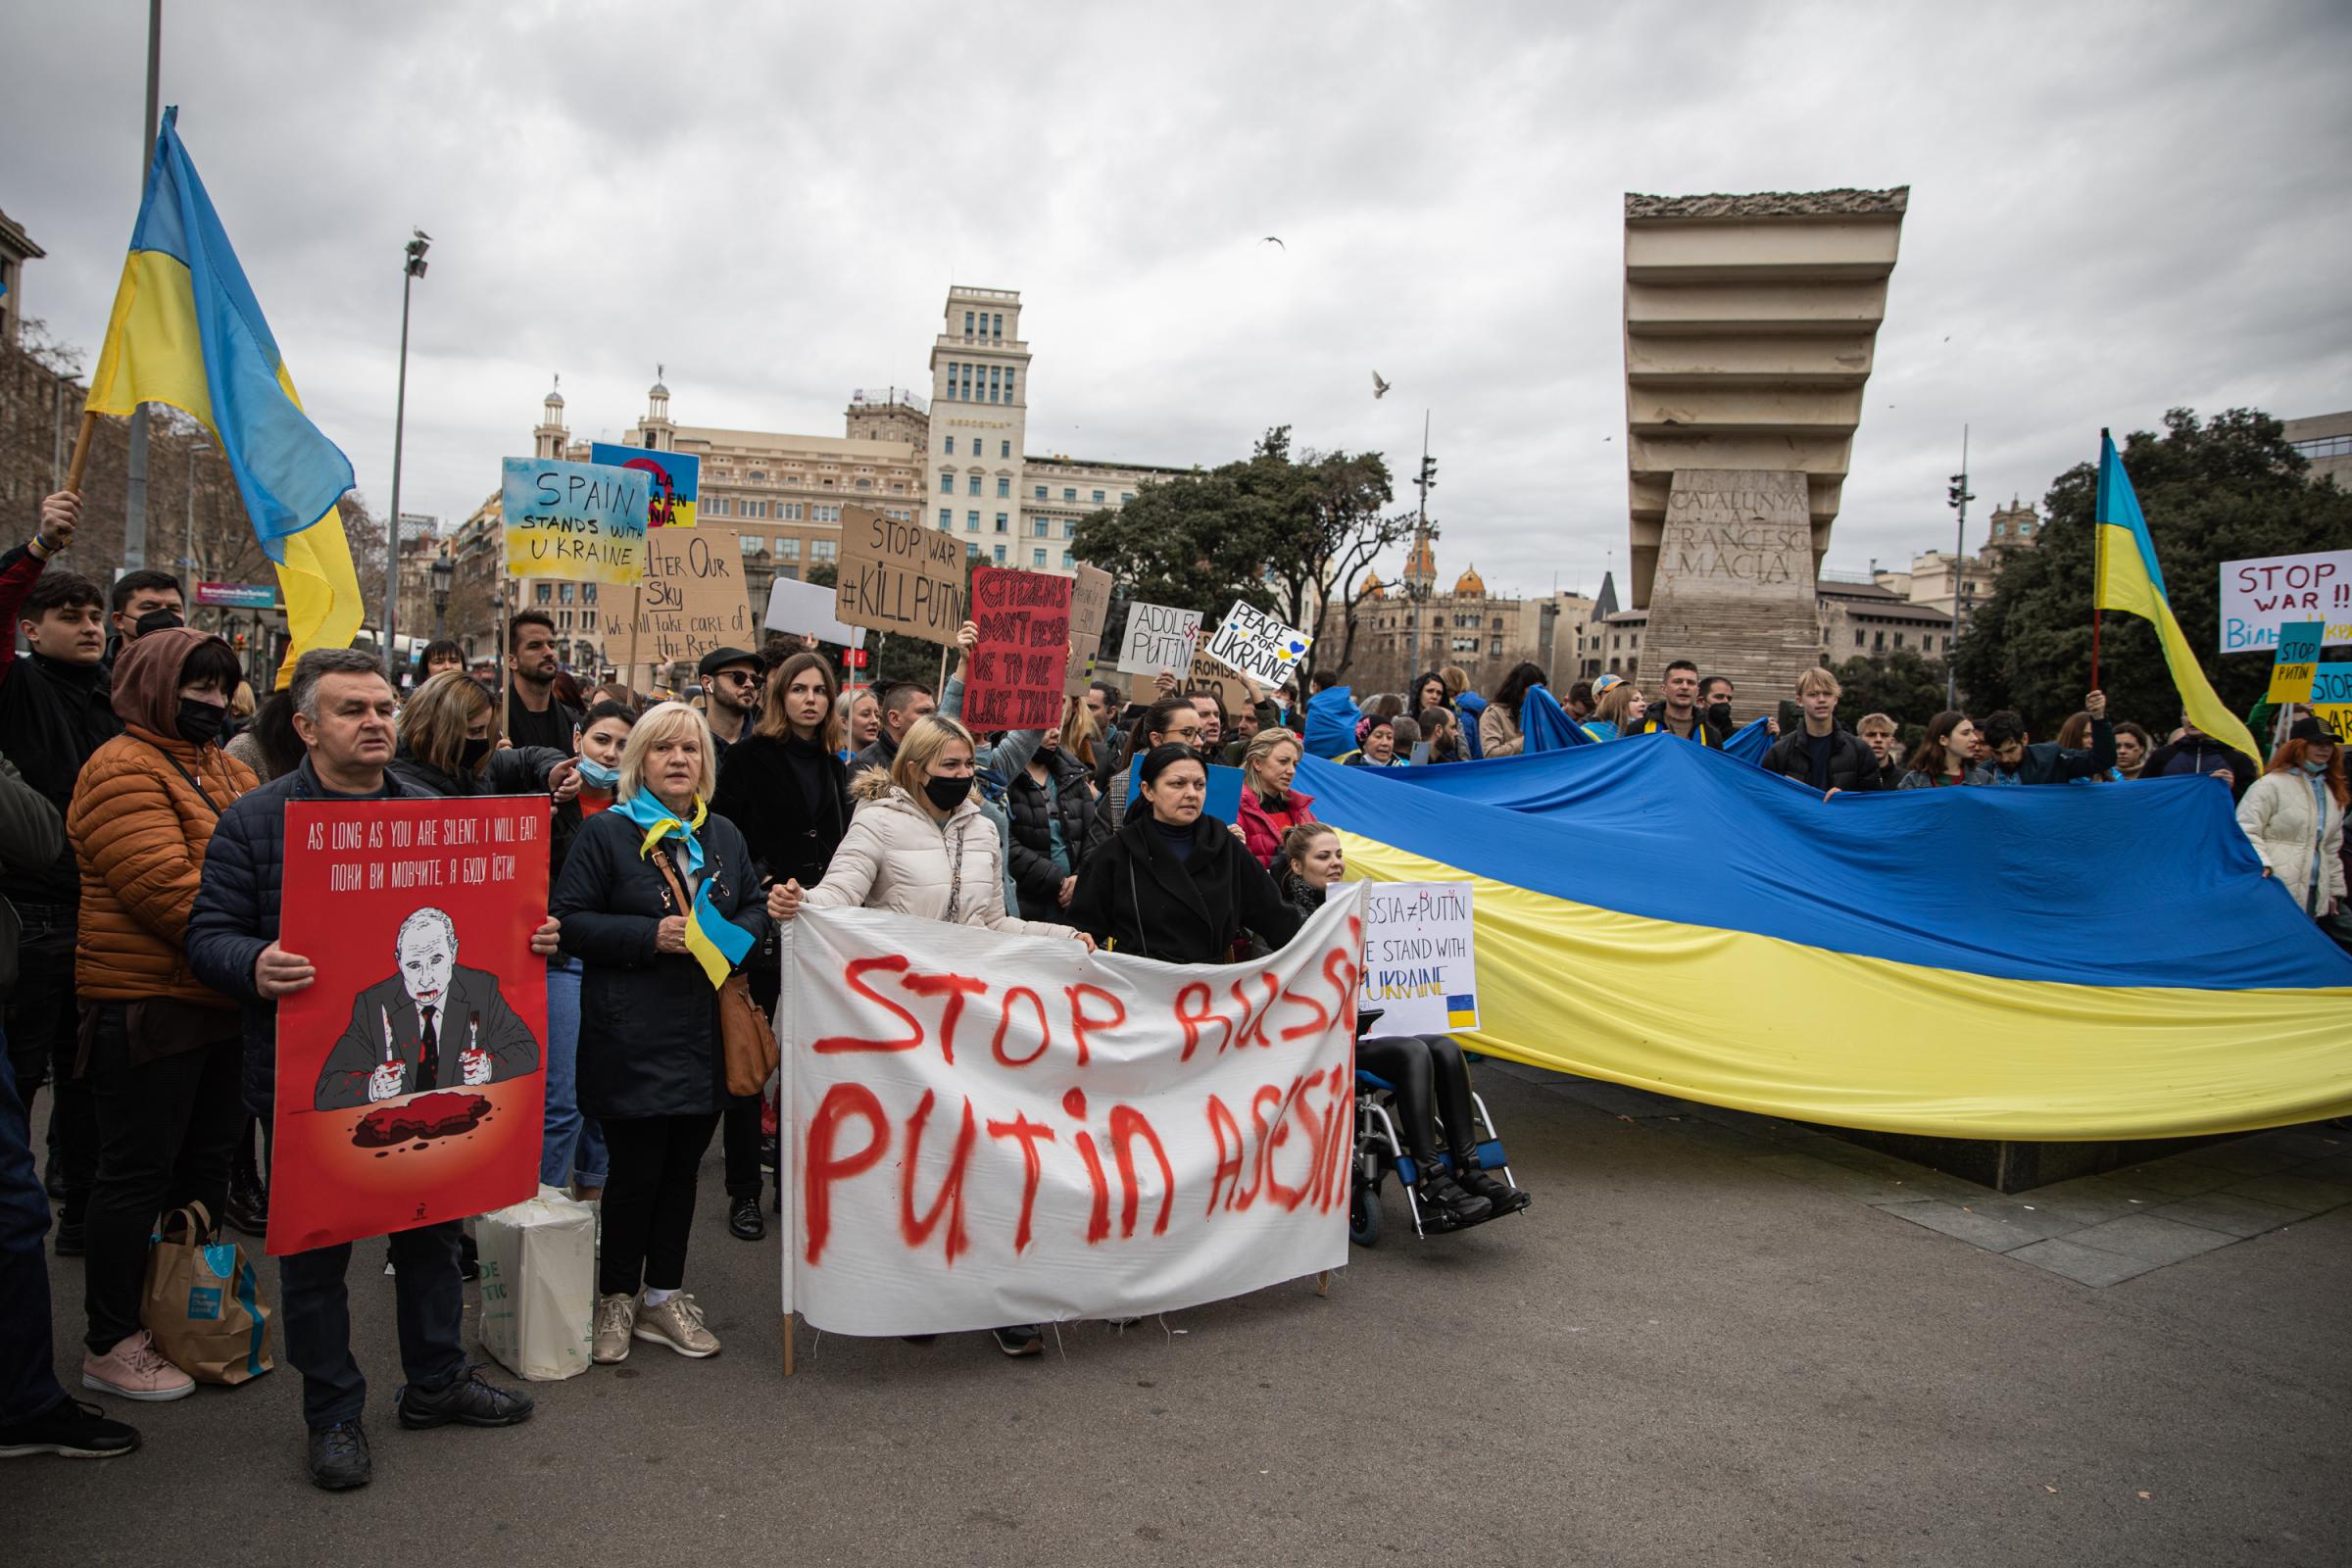 Protestors In Spain Rally For Ukraine After Russian Invasion - BARCELONA, SPAIN - FEBRUARY 26: People take part in a...